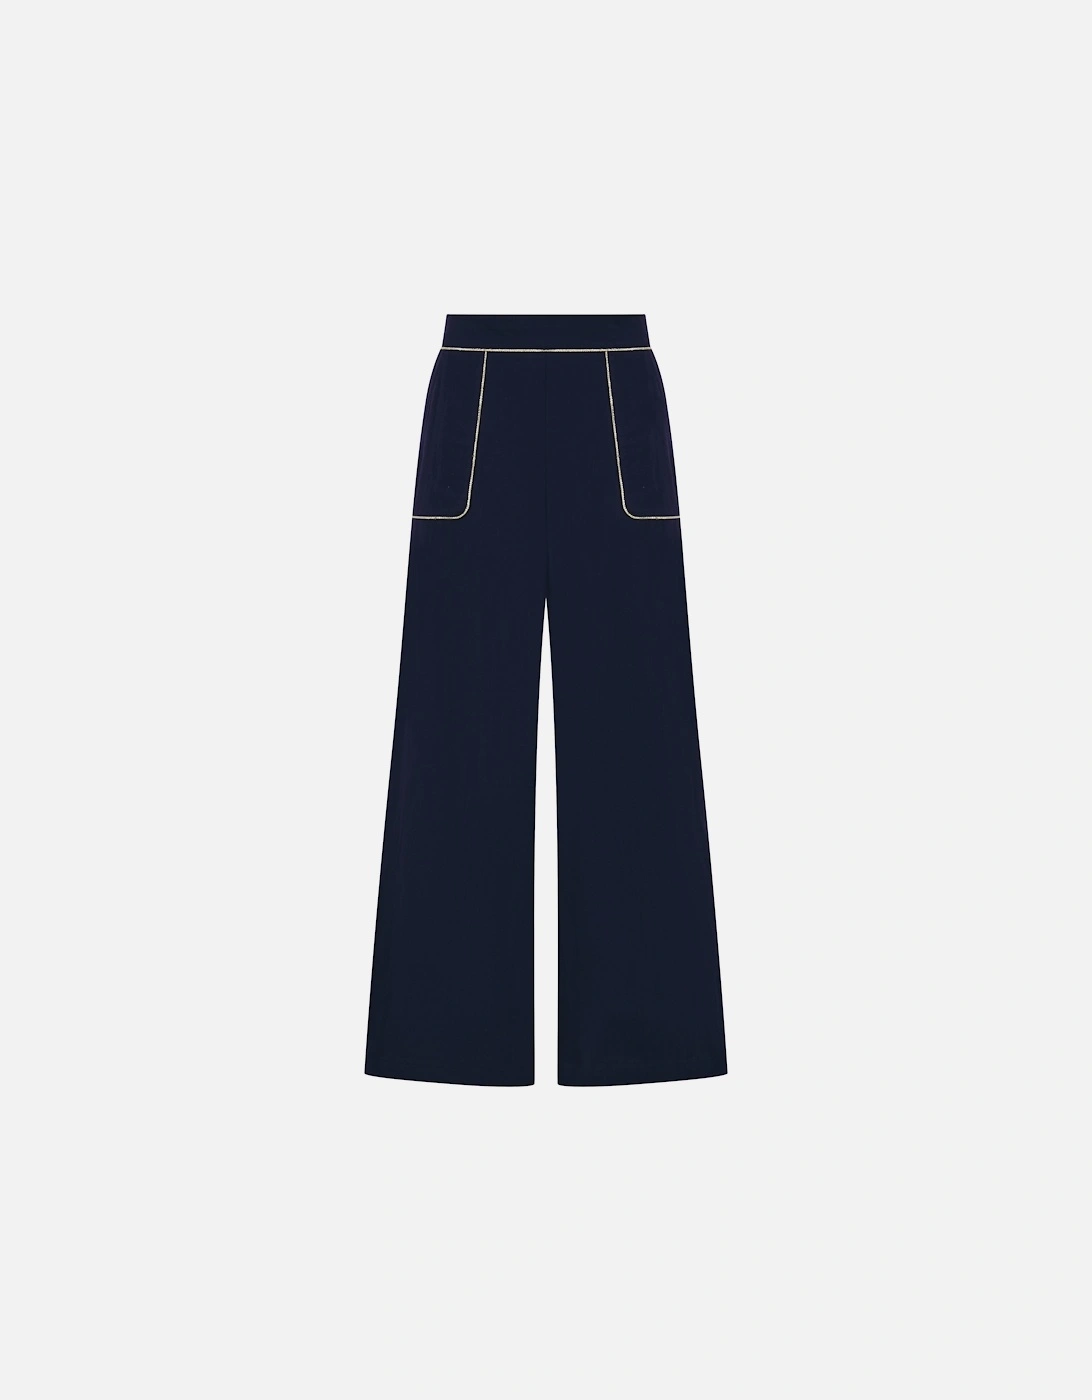 Clipper Trousers in Navy